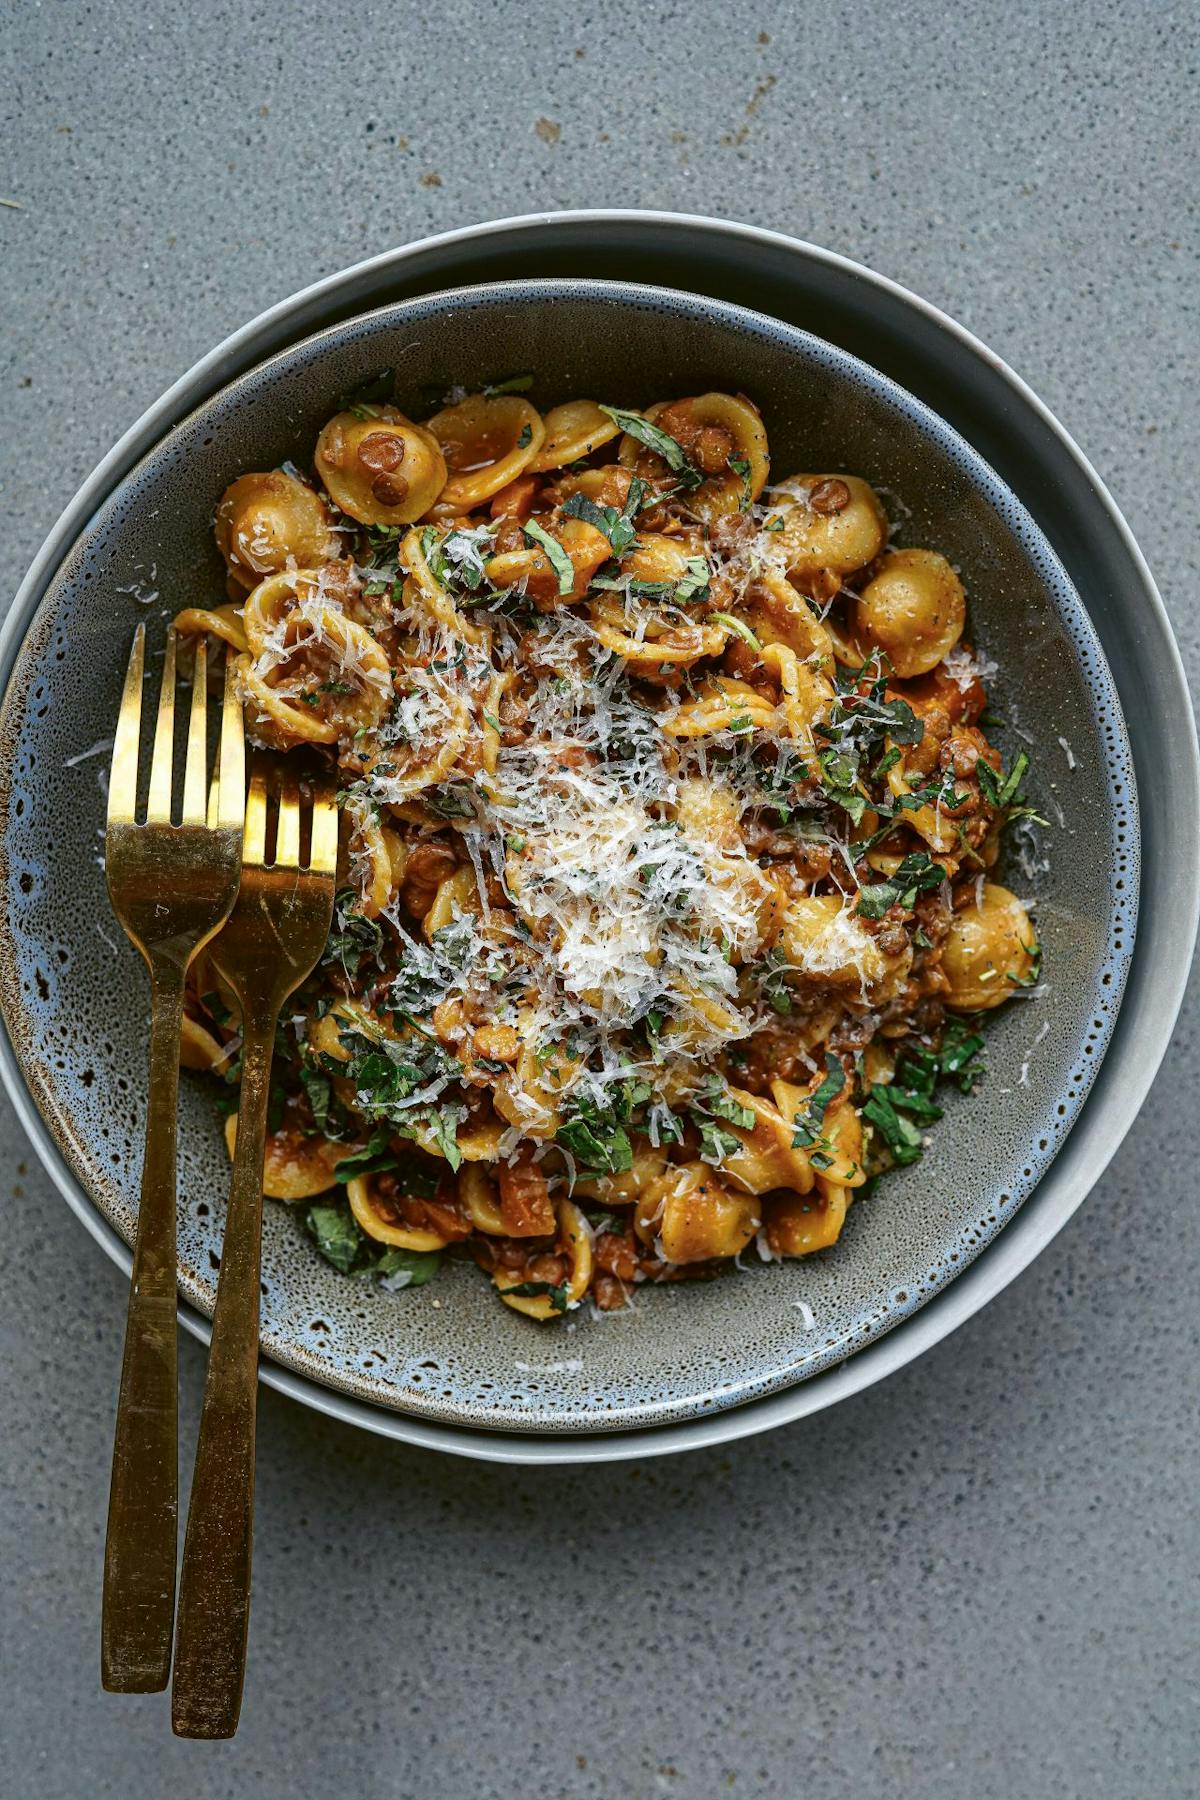 Slow cooker recipes: 3 pasta dishes for every night of the week